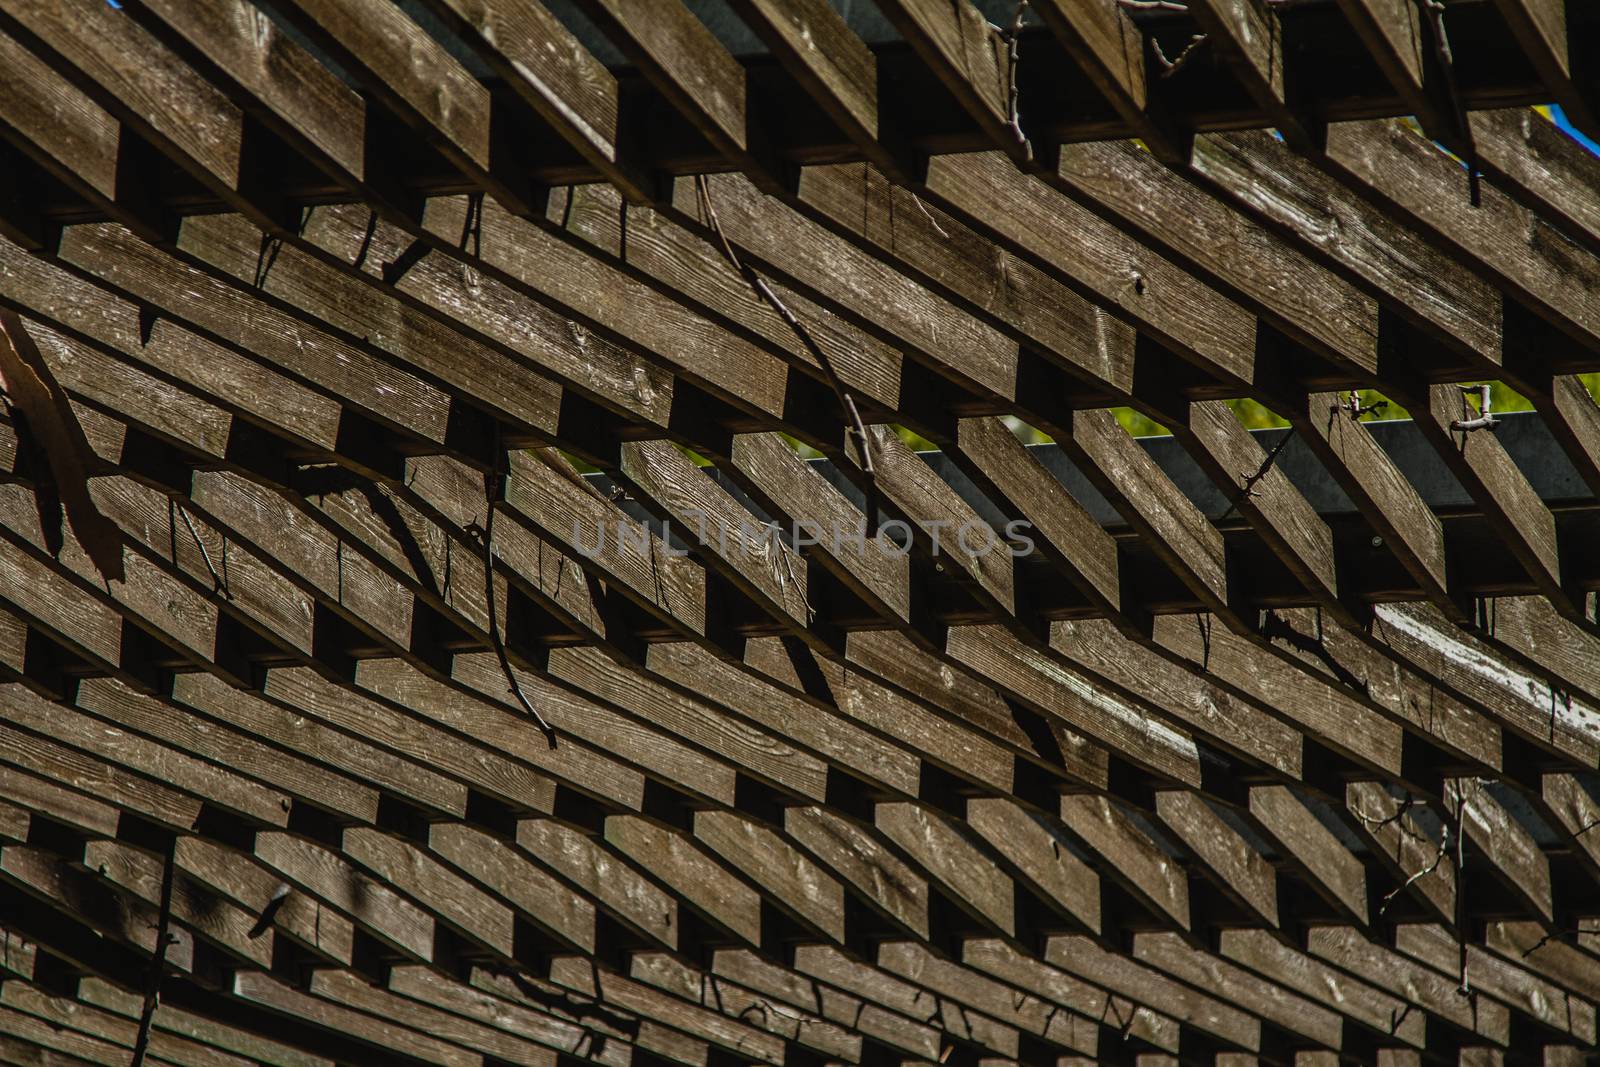 A wooden canopy structure